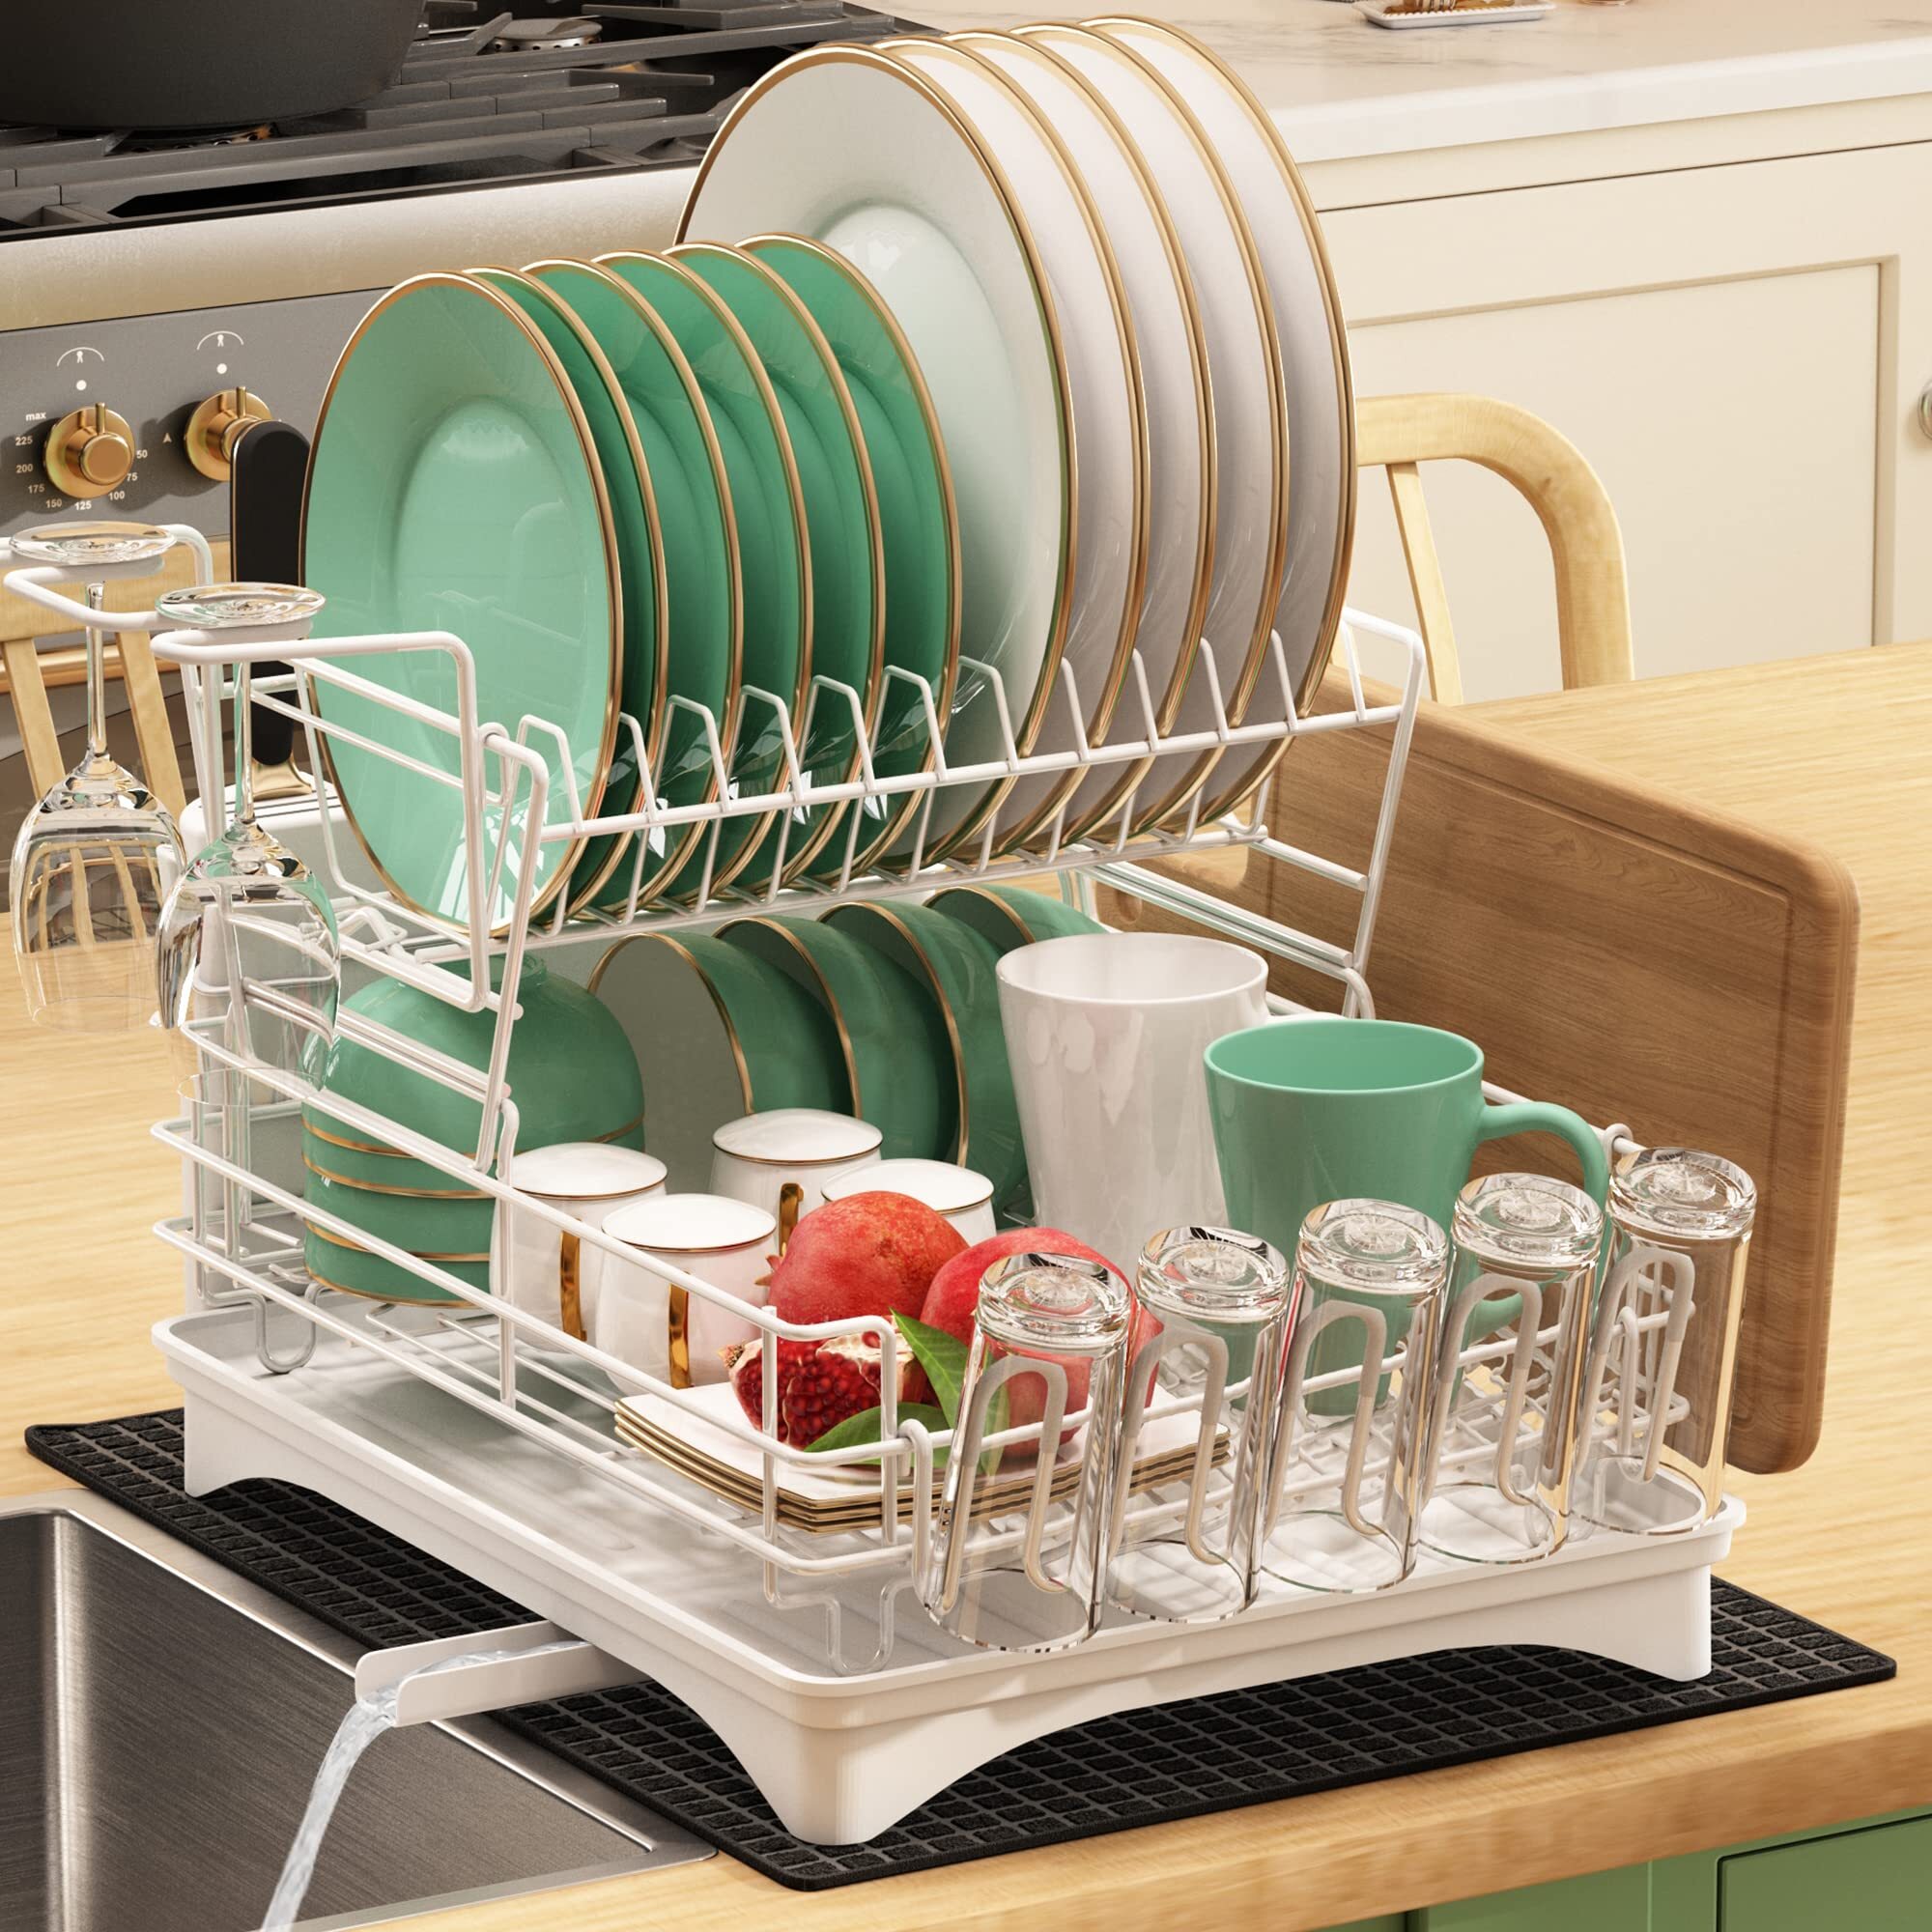 Dish Drying Rack- Space-Saving Dish Rack, Dish Racks for Kitchen Counter, Durable Stainless Steel Kitchen Drying Rack with a Cutlery Holder, Drying Rack for Dishes, Knives, Spoons, and Forks